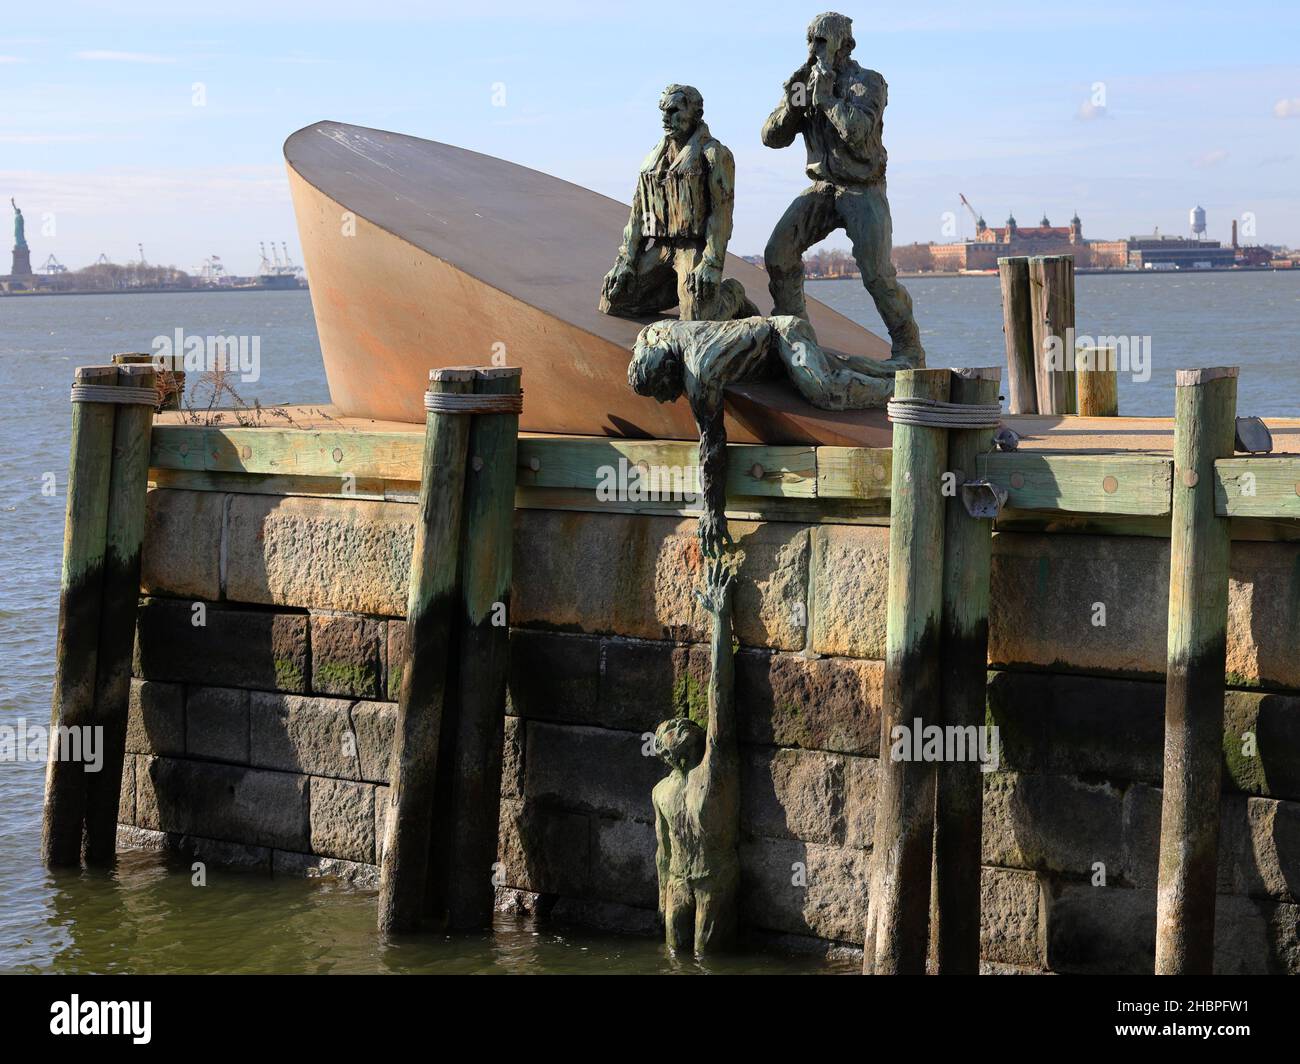 American Merchant Mariners Monument, Battery Park, New York, NY. a sculpture honoring the thousands of merchant mariners who have died at sea. Stock Photo